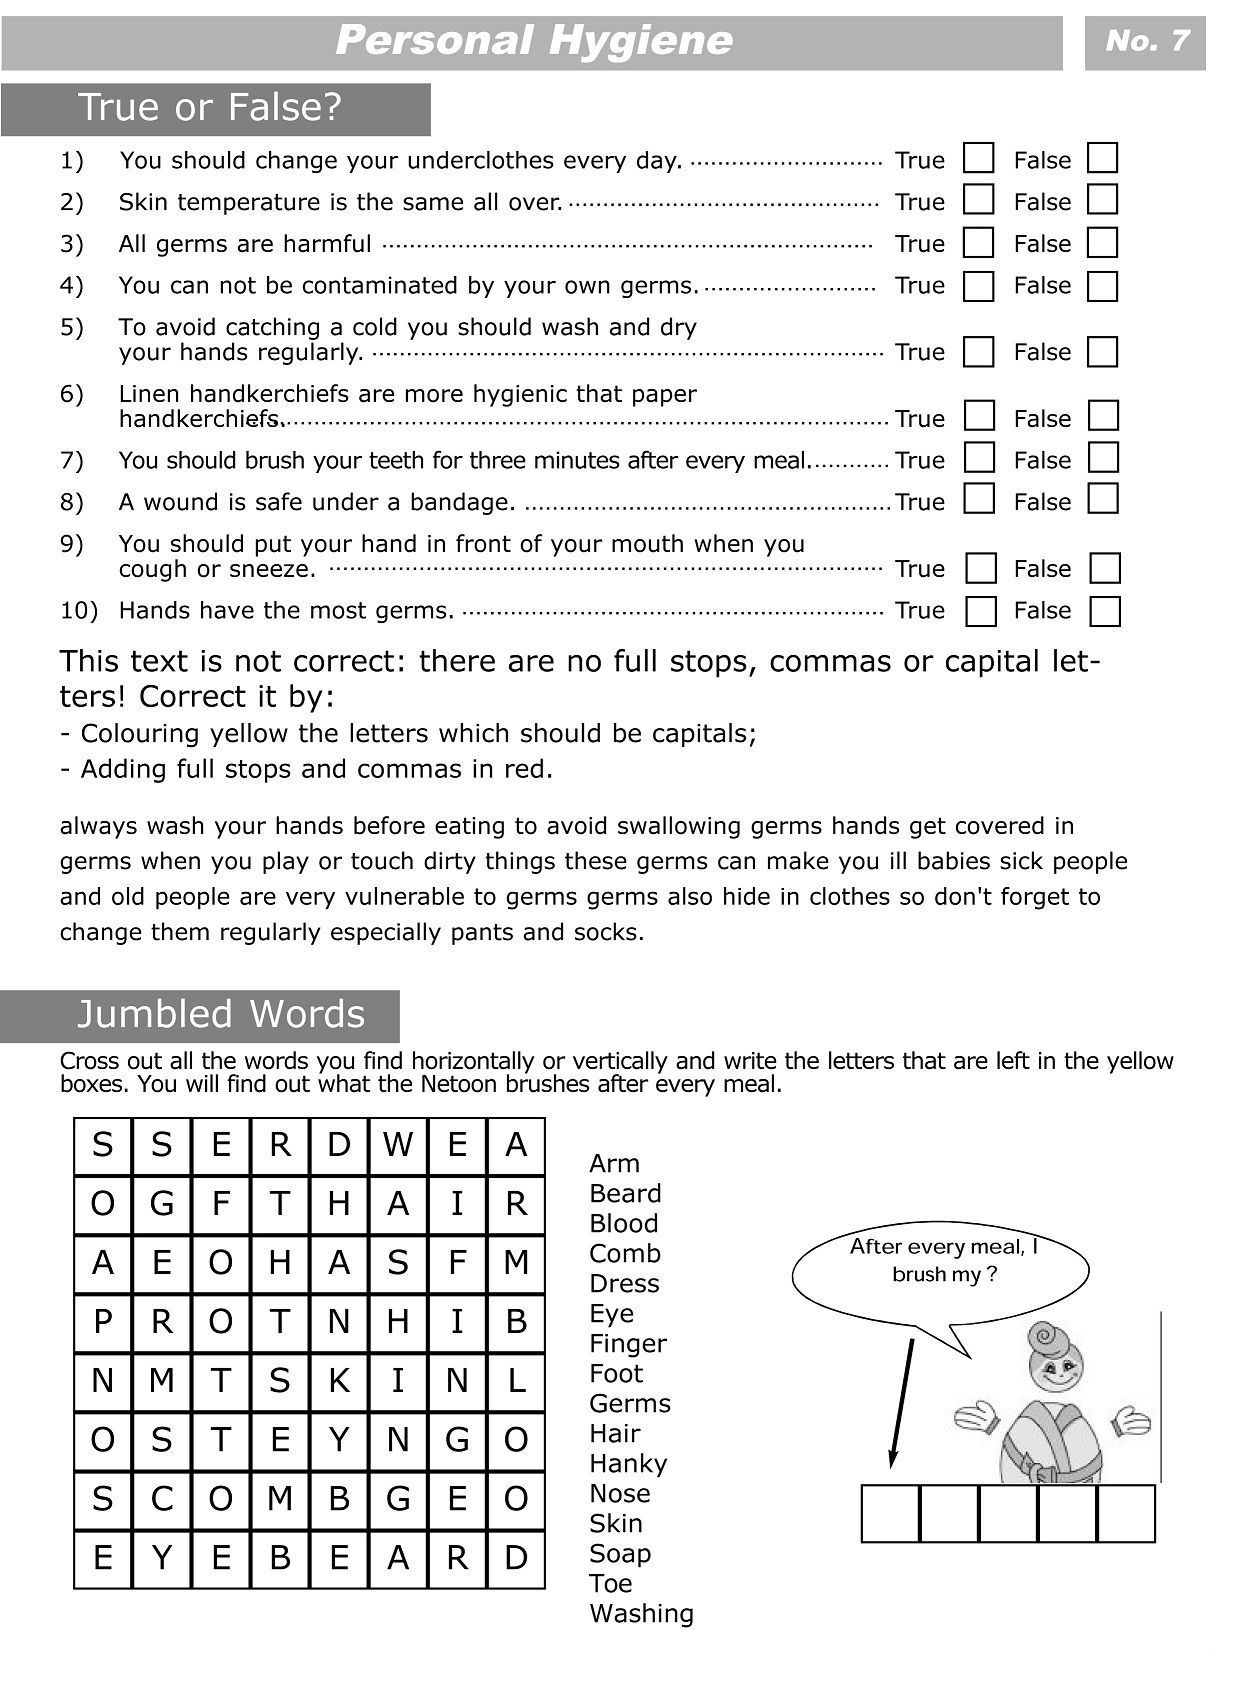 Printable Worksheets For Personal Hygiene | Personal Hygiene